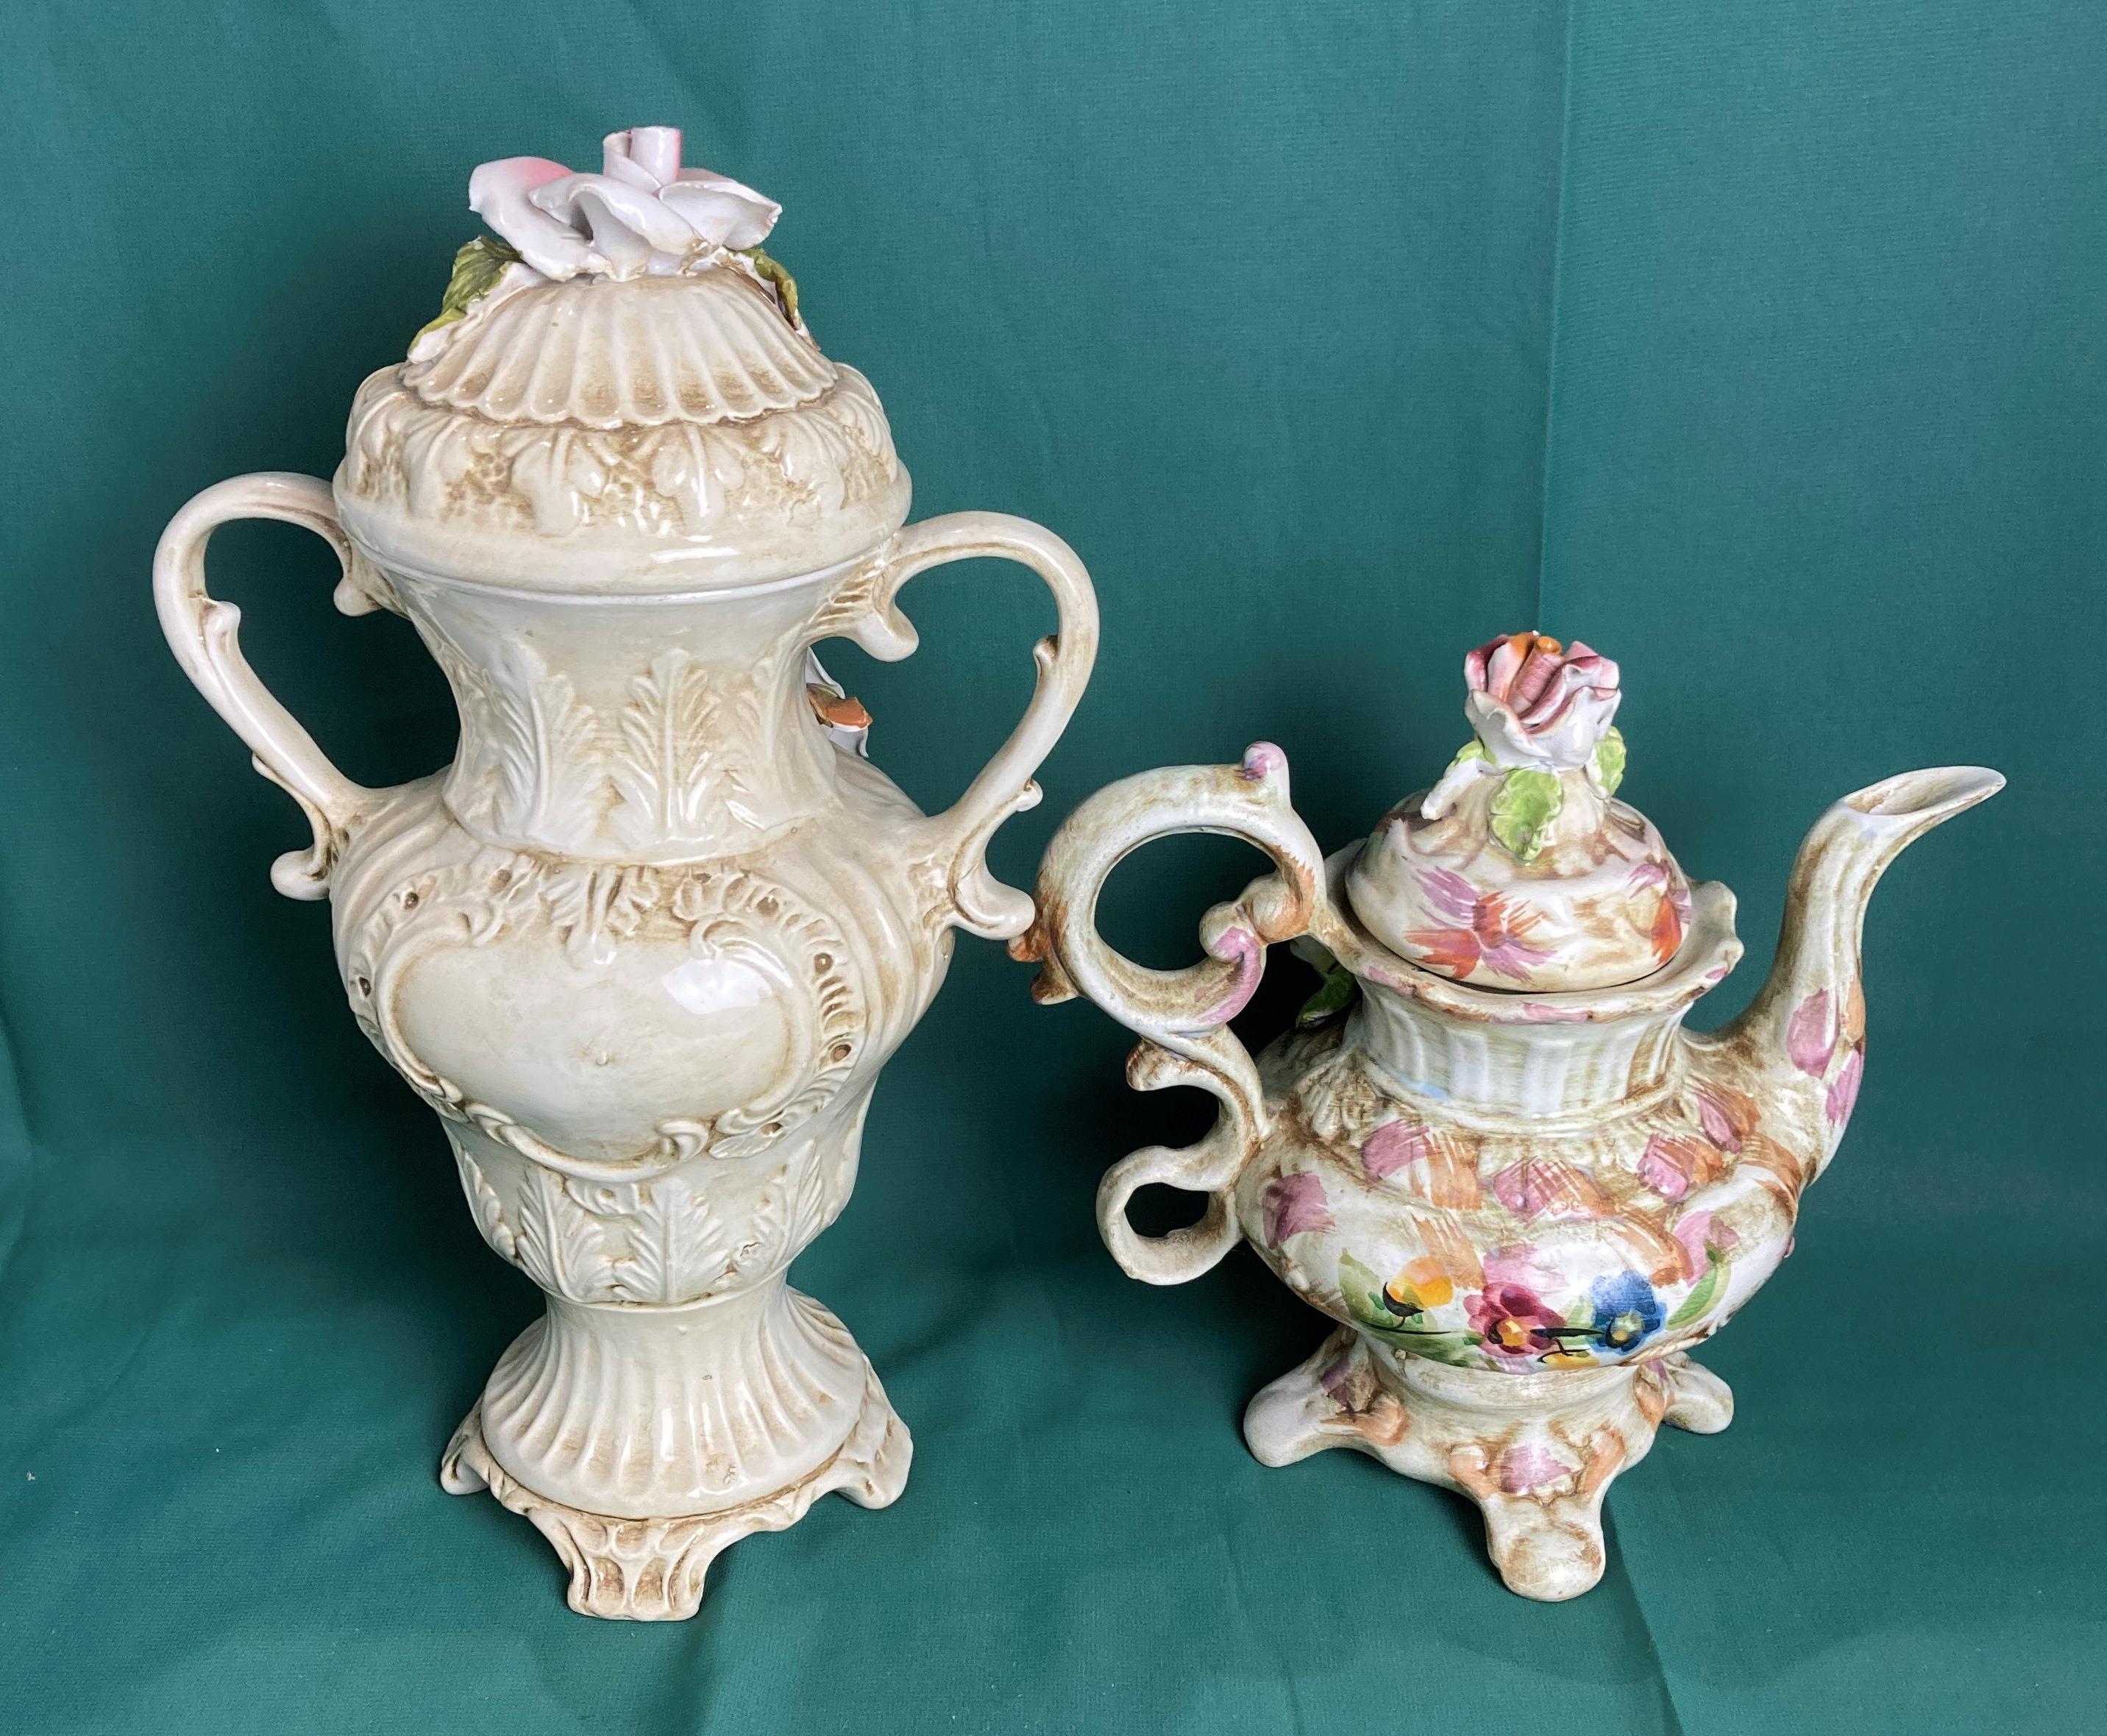 Italian Capodimonte vase (29cm high) with stamp to base and a Capodimonte-style teapot, - Image 2 of 3